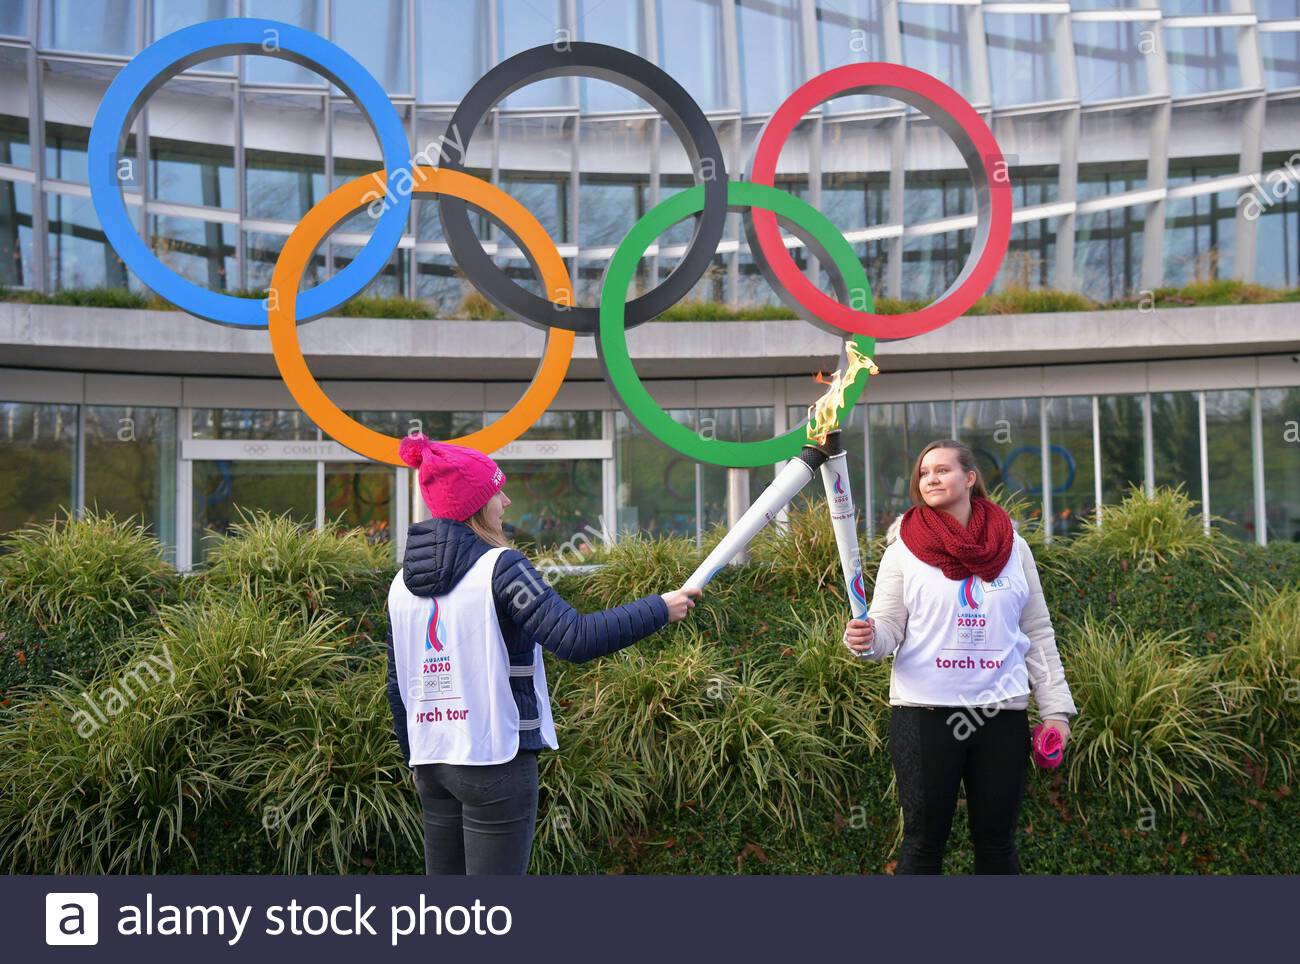 lausanne jan 8 2020 xinhua torch bearer christelle boivin l passes the torch to aurore locher during a torch relay for the 3rd youth winter olympic games in lausanne switzerland jan 8 2020 xinhuawang qingqin 2AKAY07